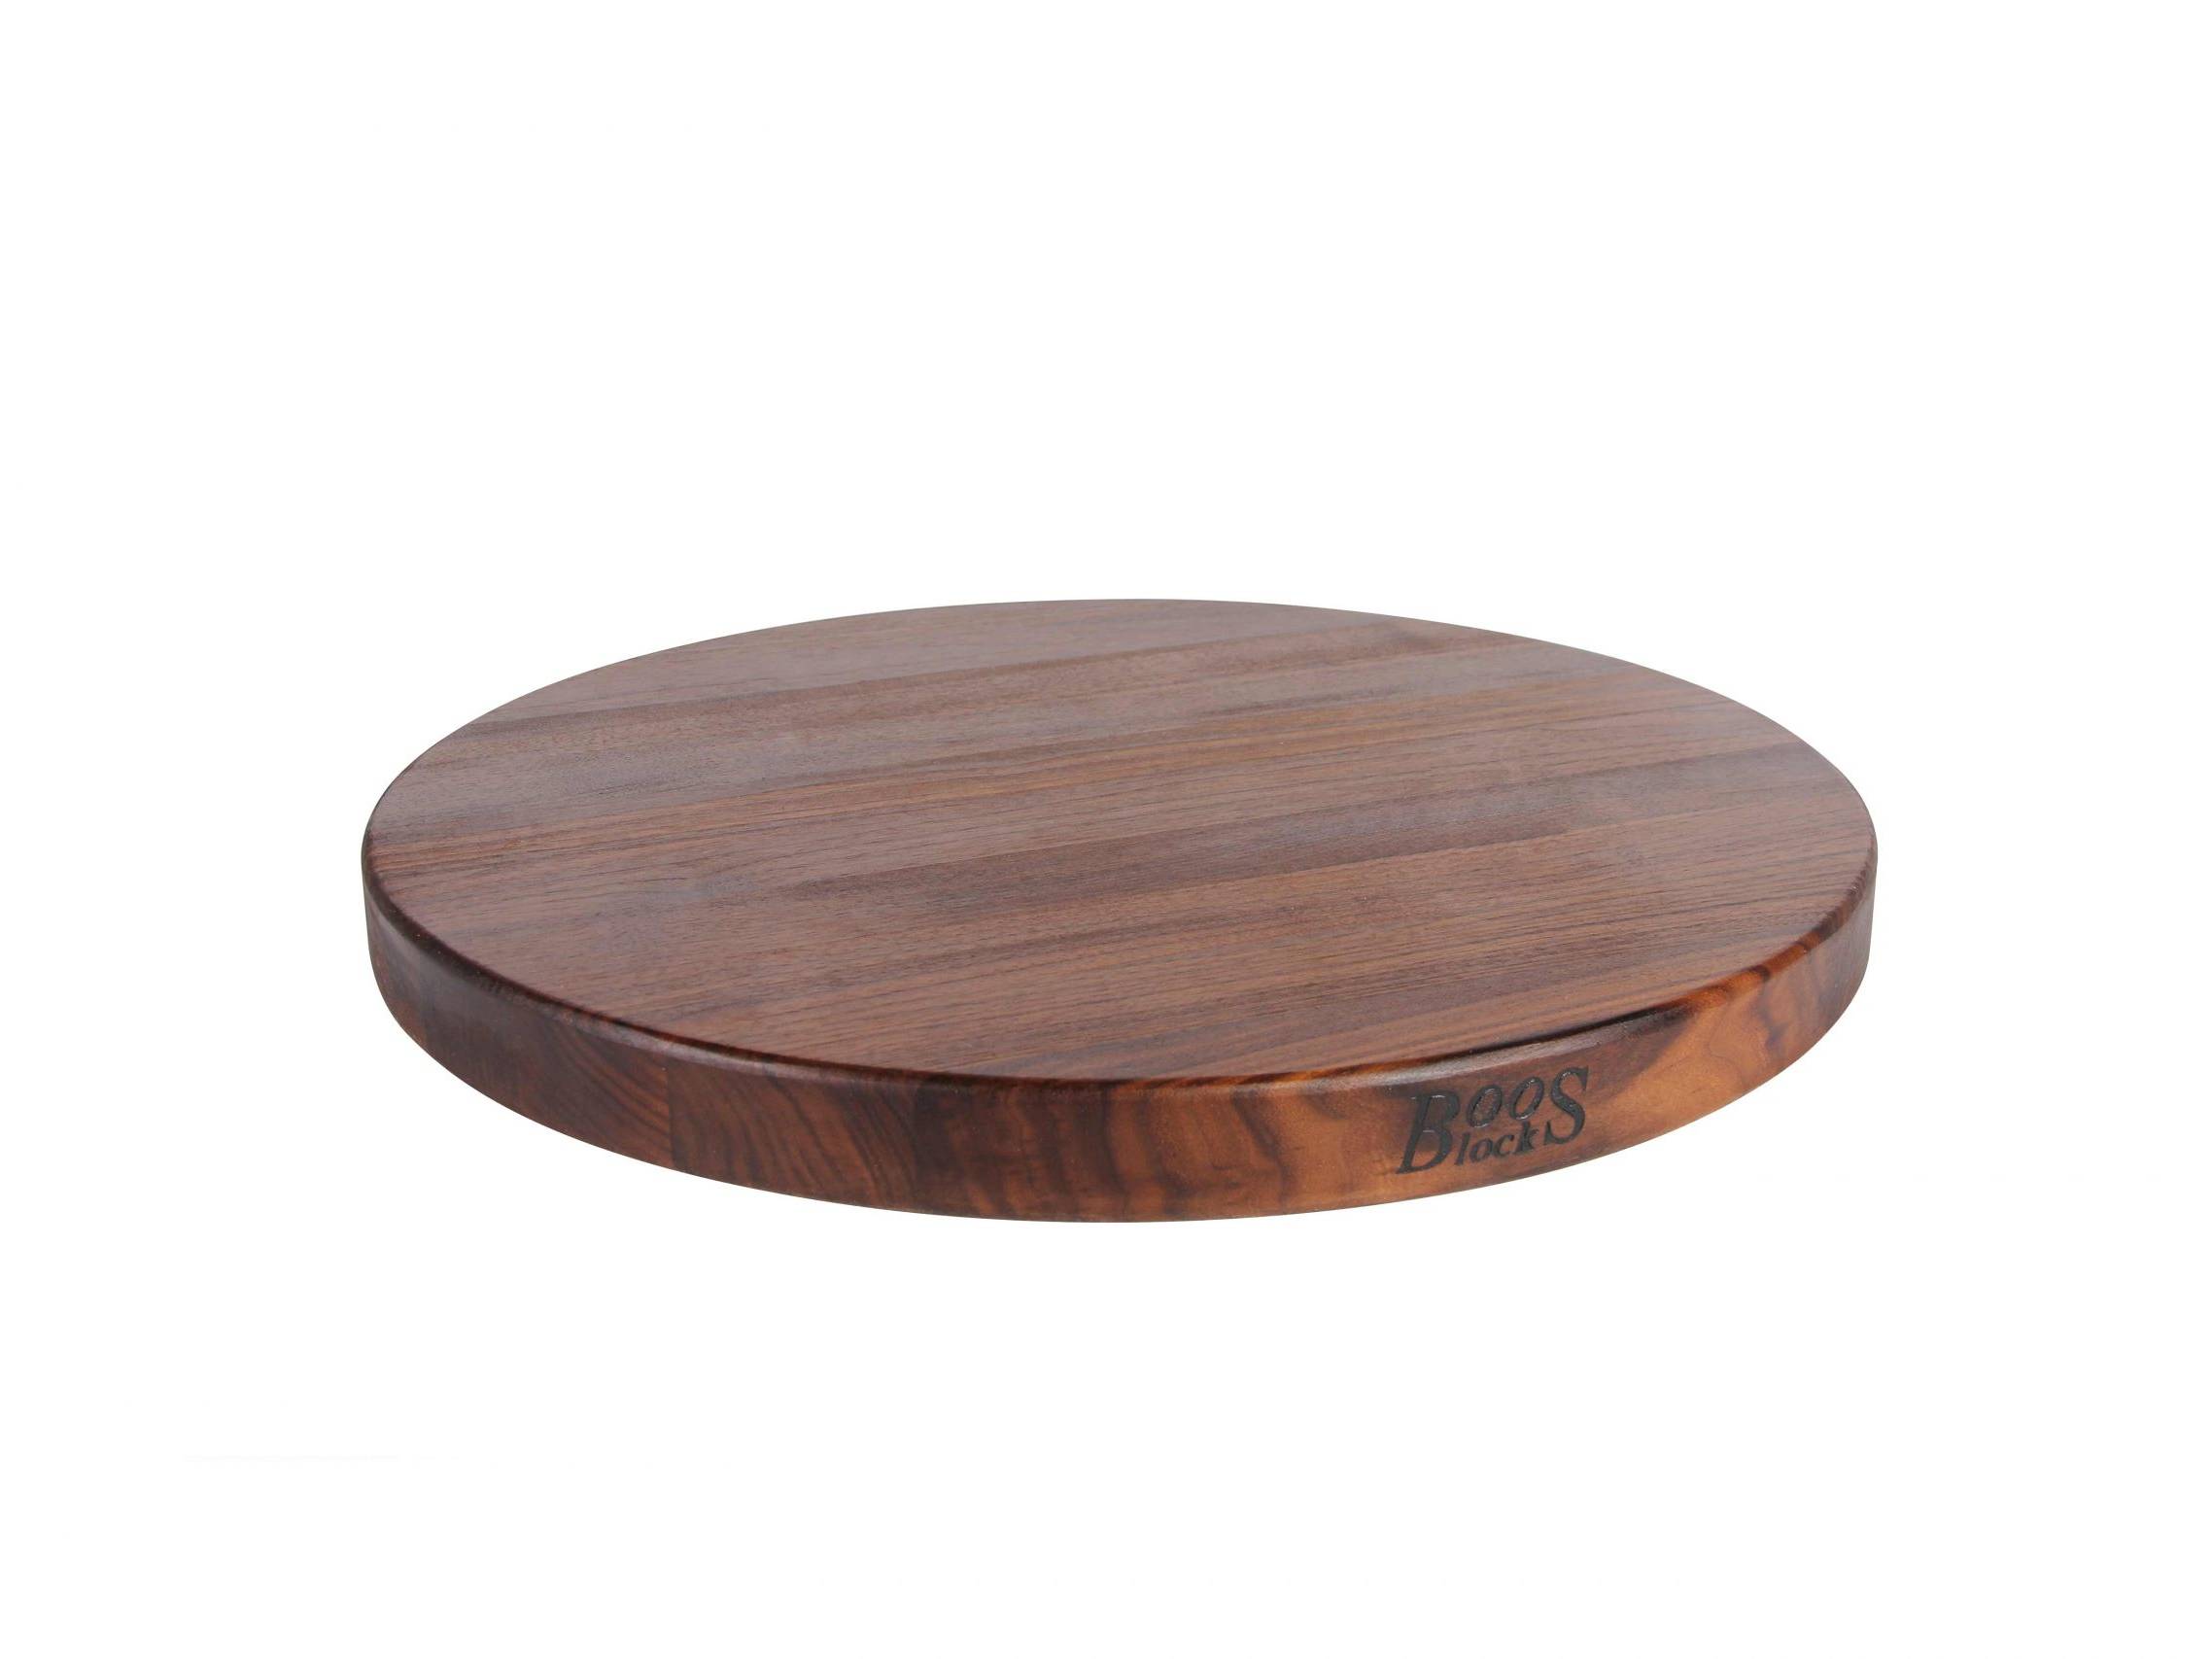 Pro Chef Round Cutting Board With Recessed Handles; Black Walnut; Can Be Used on Both Sides 61